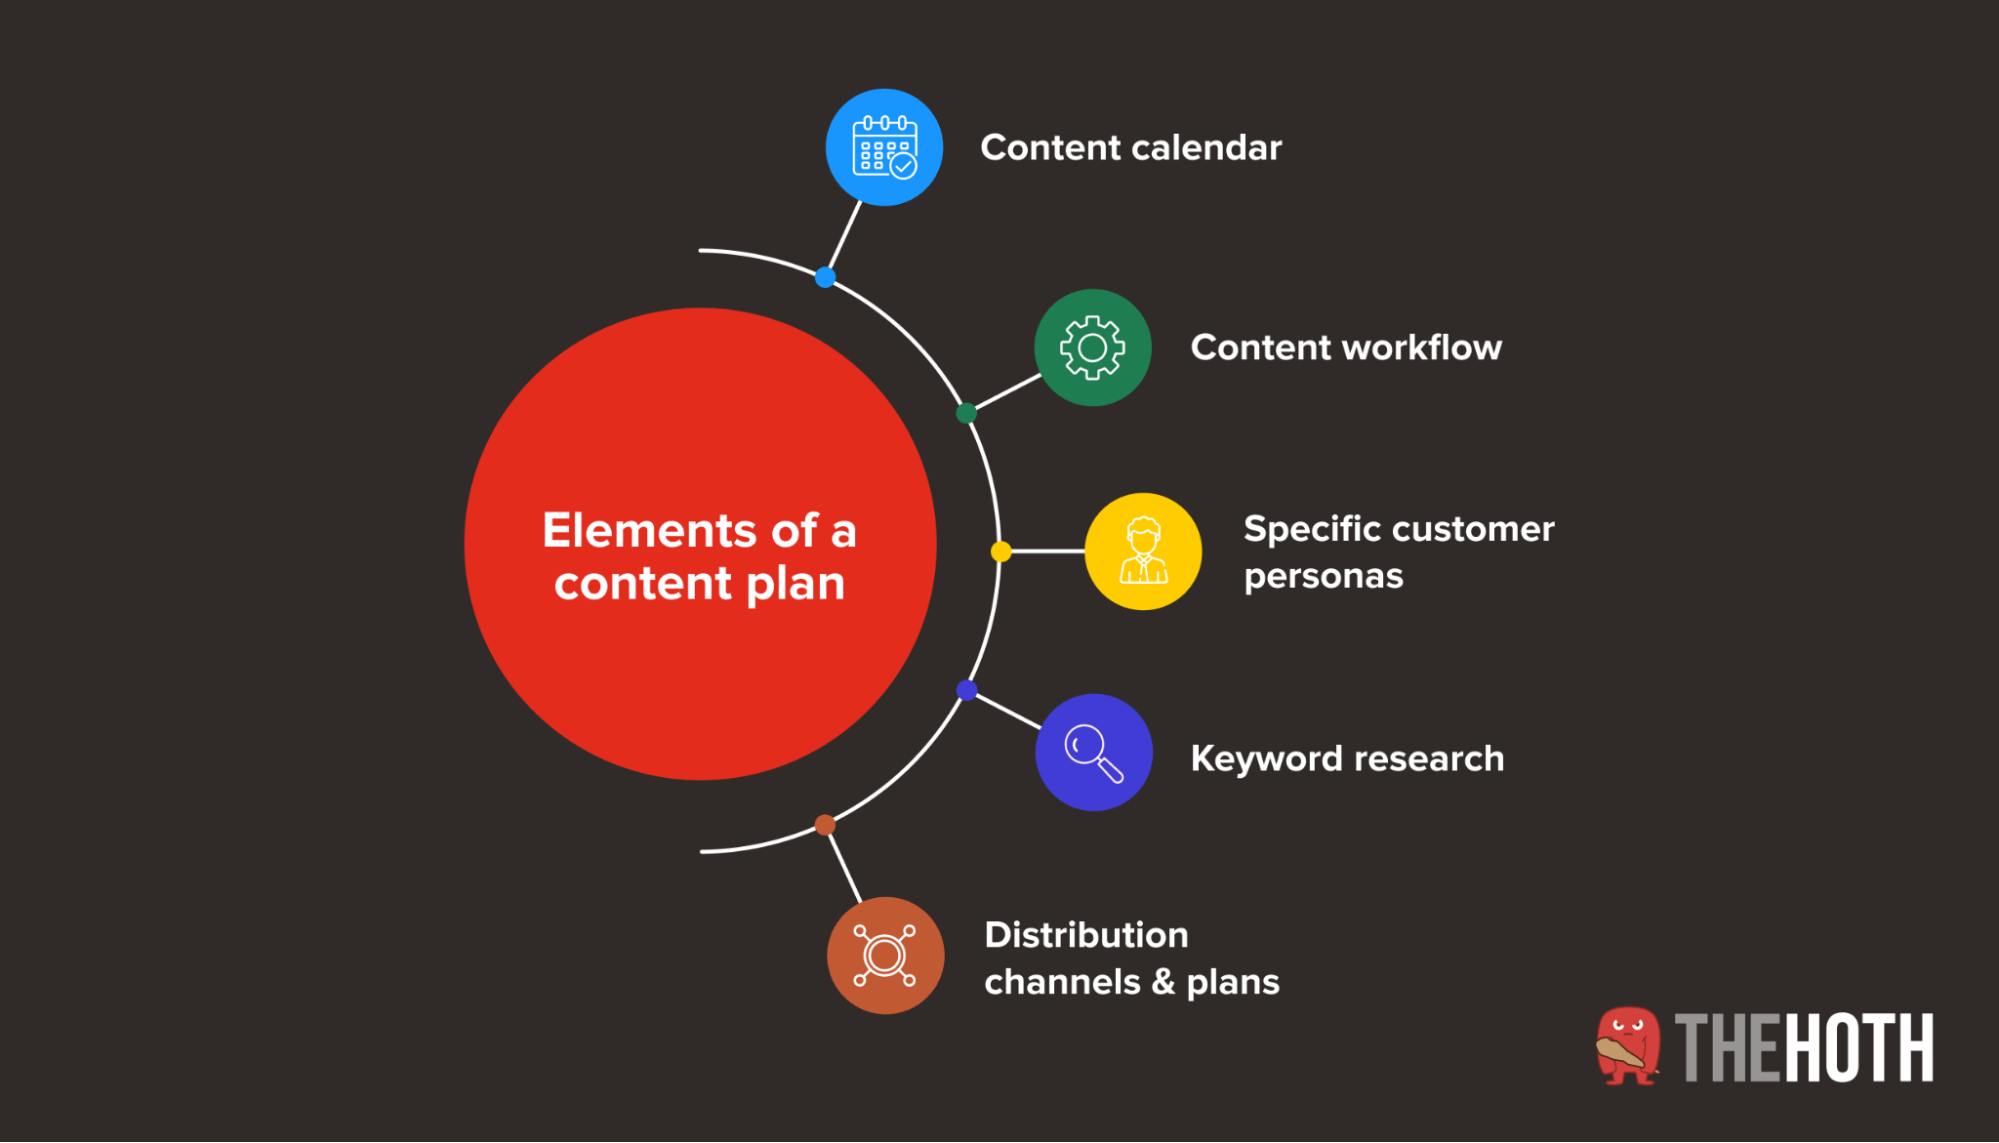 Elements of a content plan